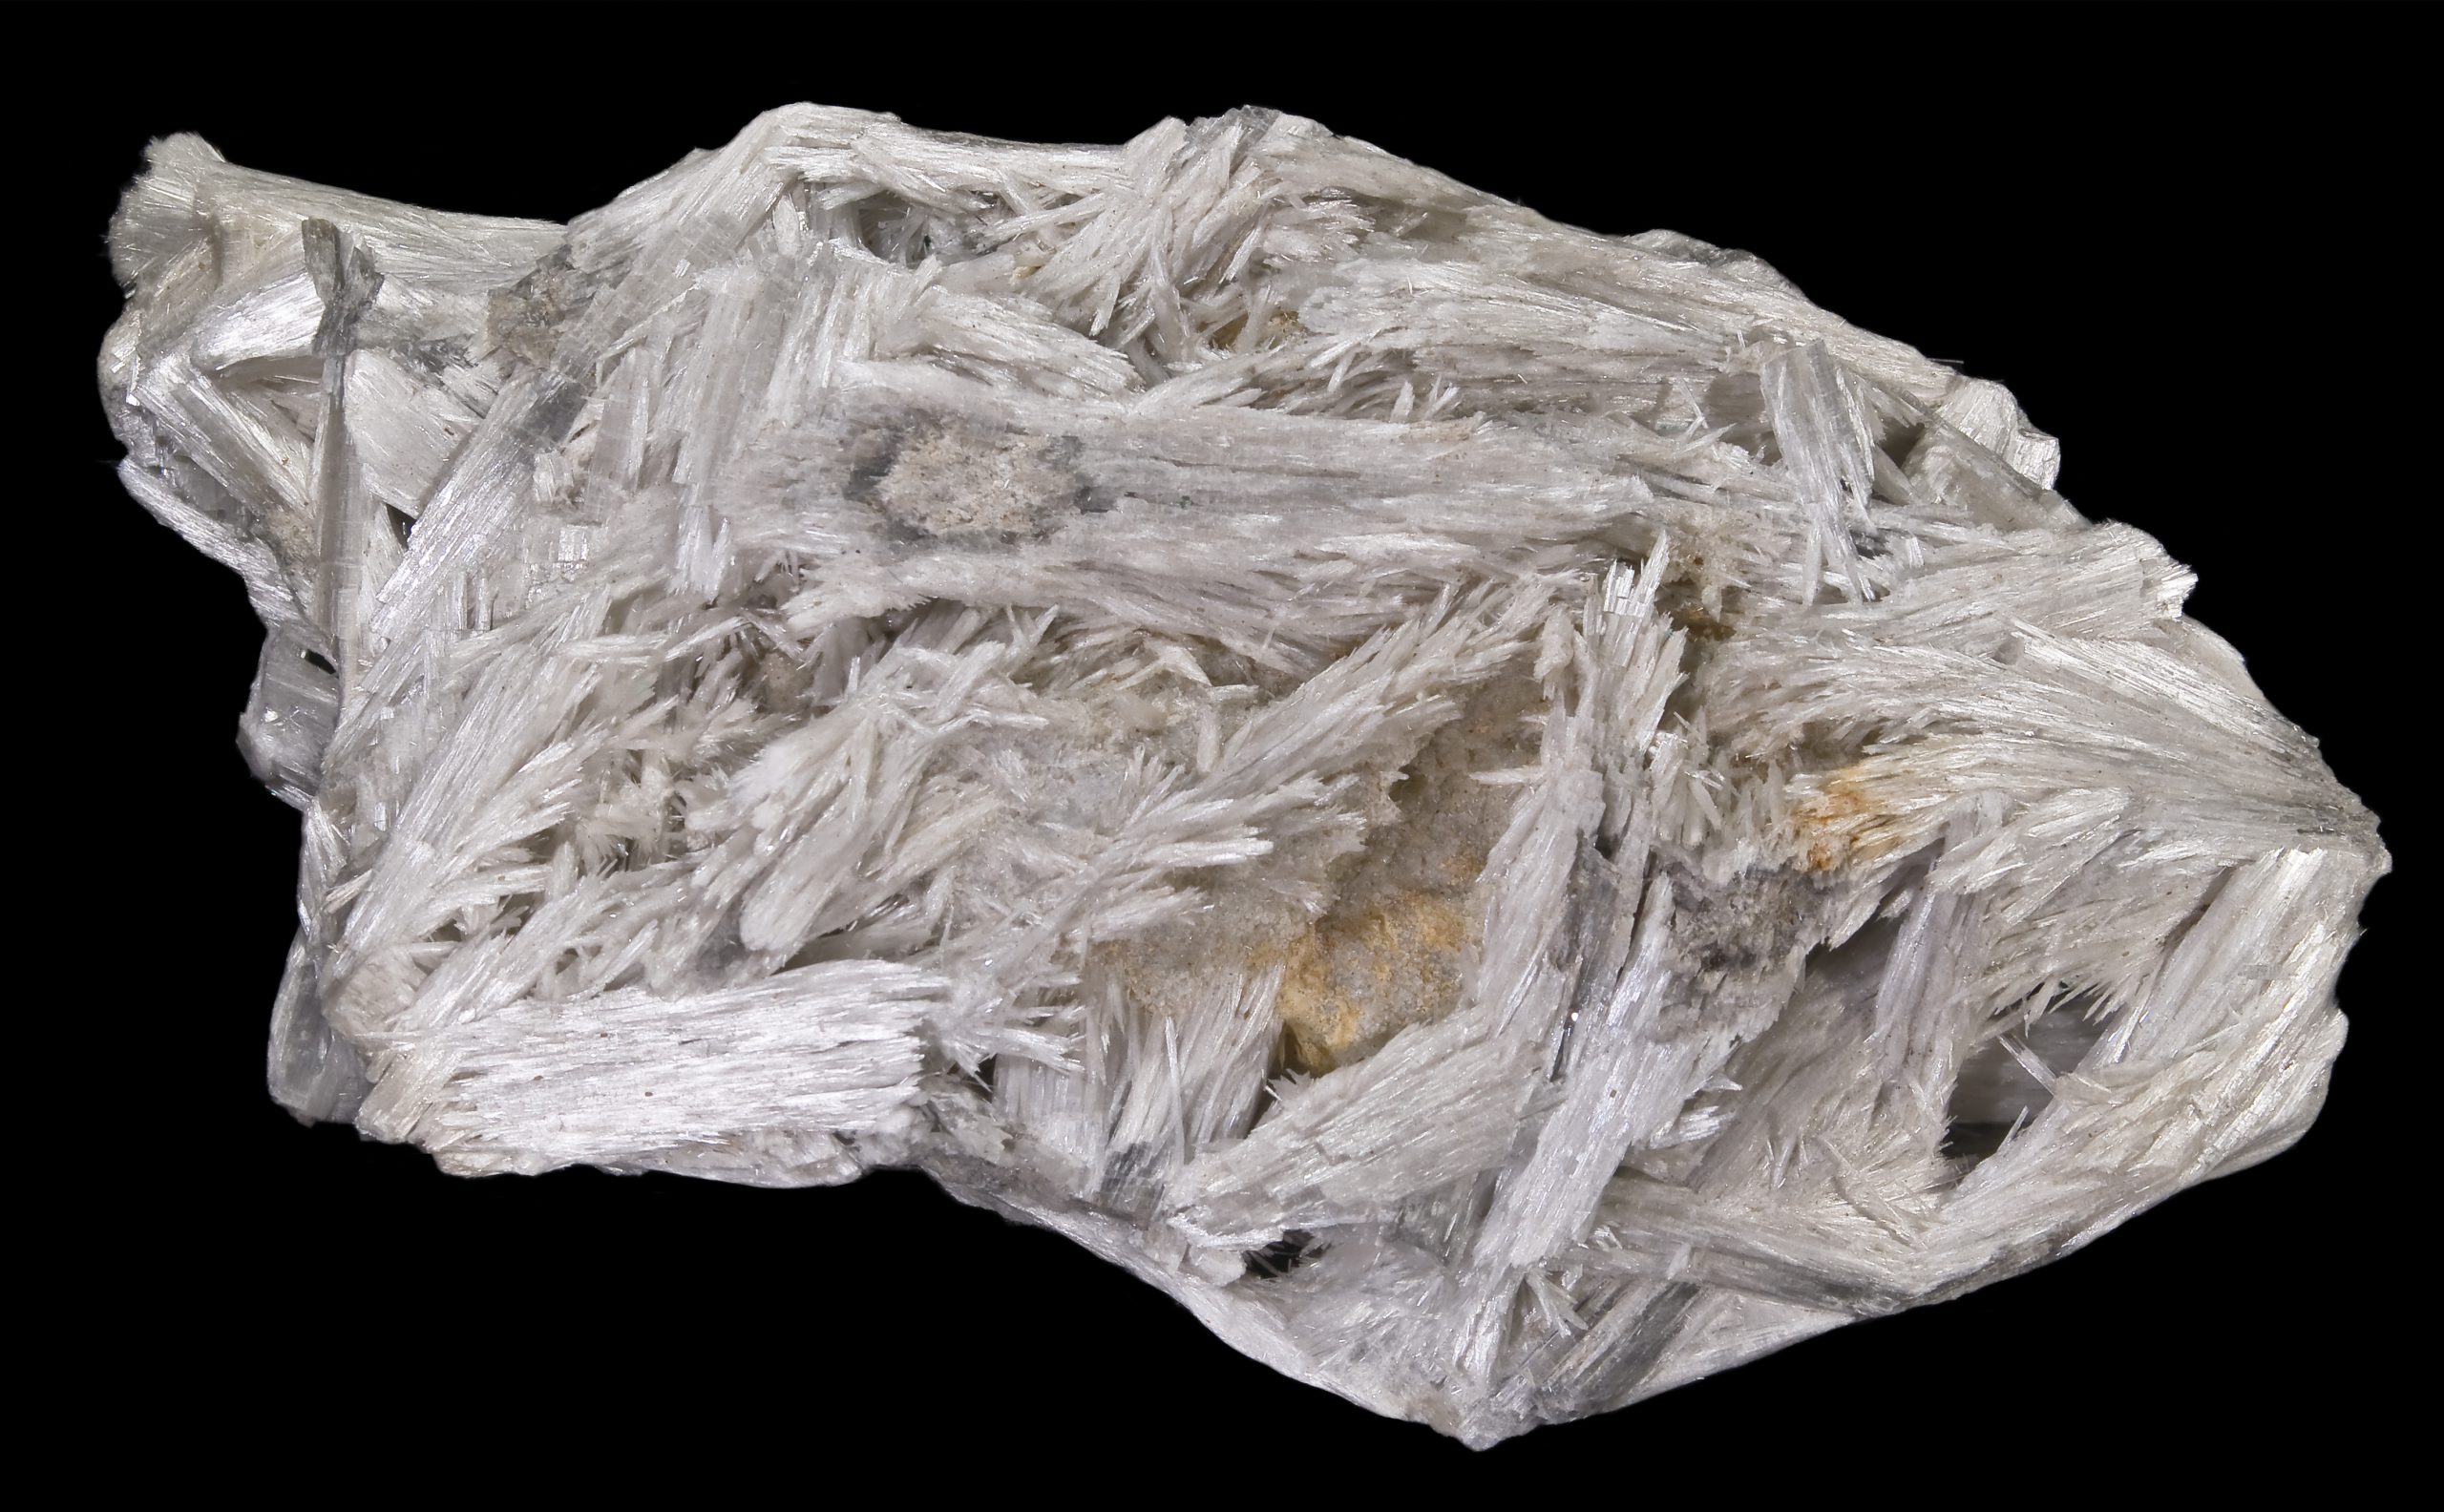 Light gray mineral with long, skinny, distinguishable crystals in every direction